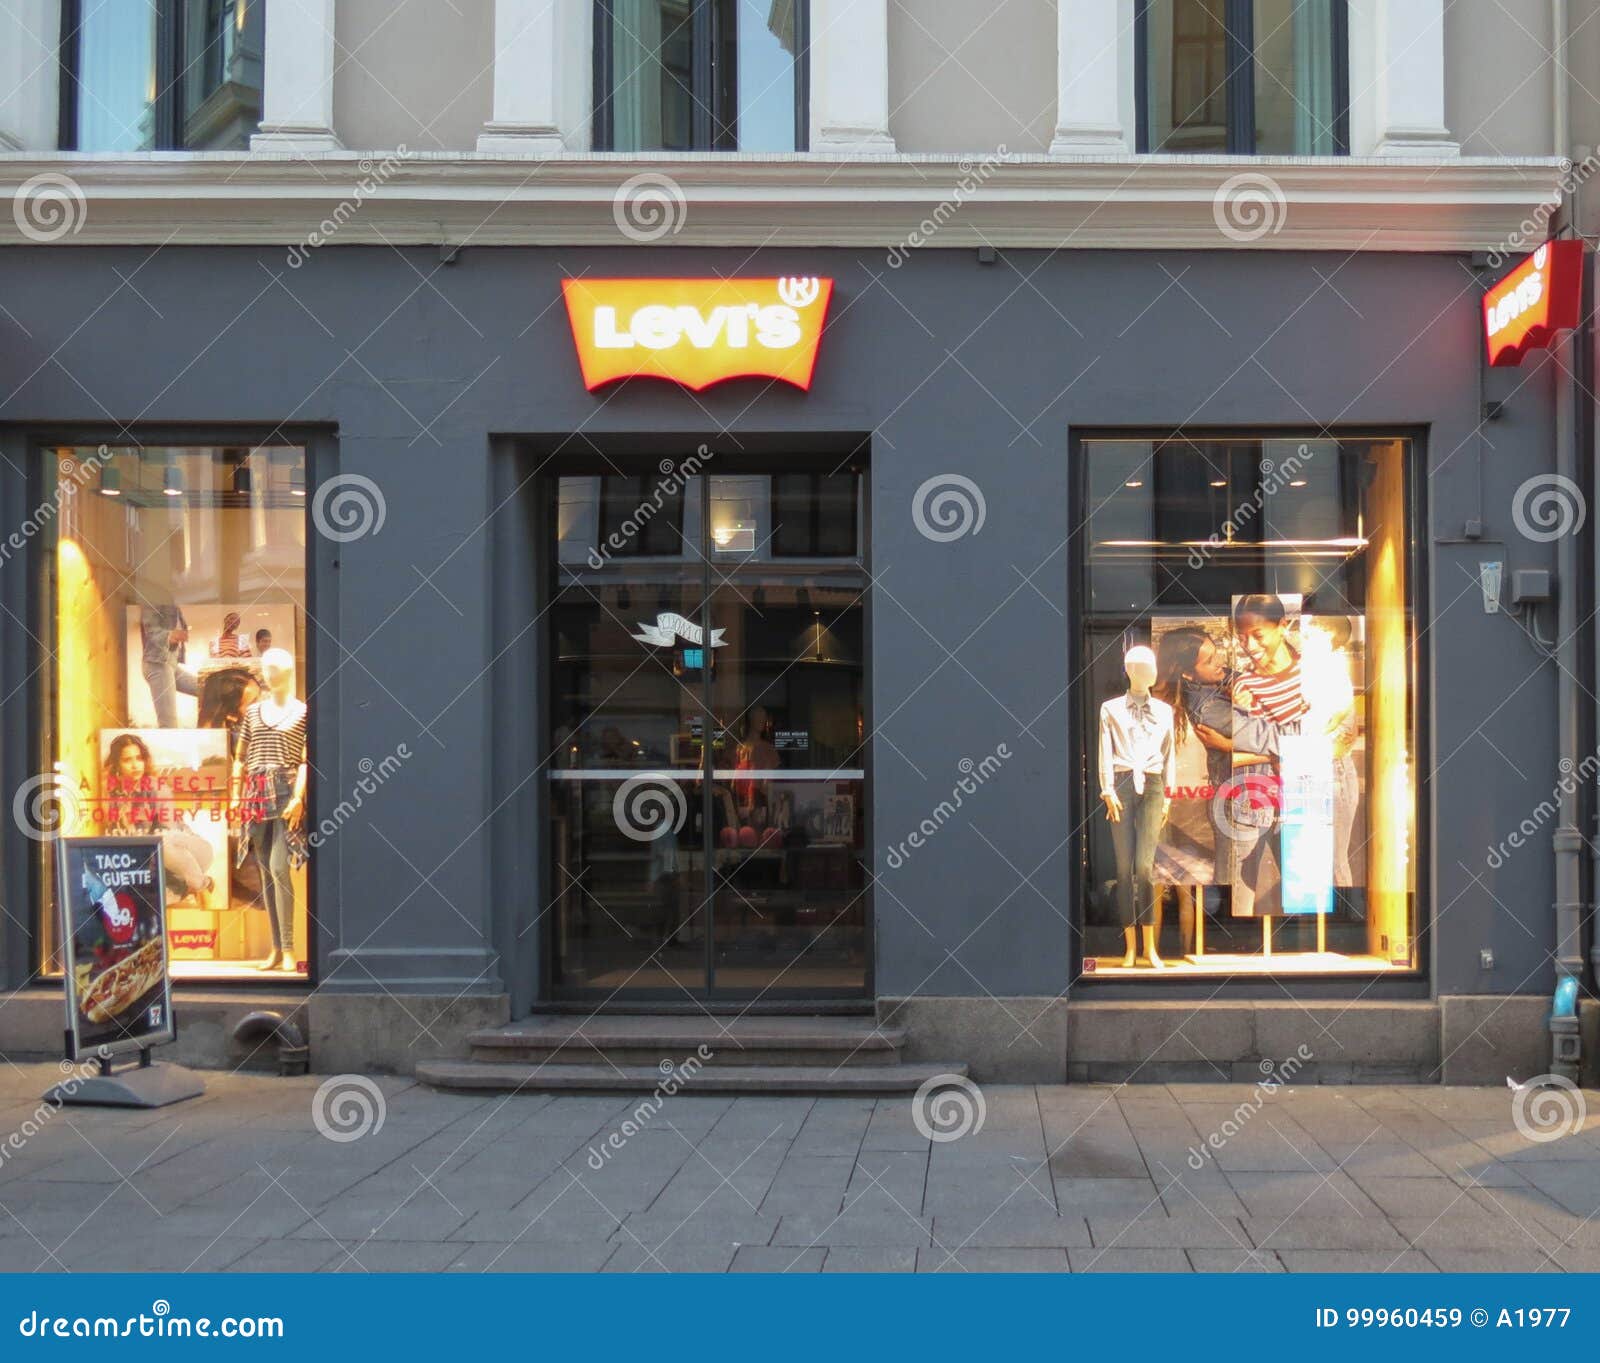 Levi s store in Oslo editorial stock image. Image of europe - 99960459